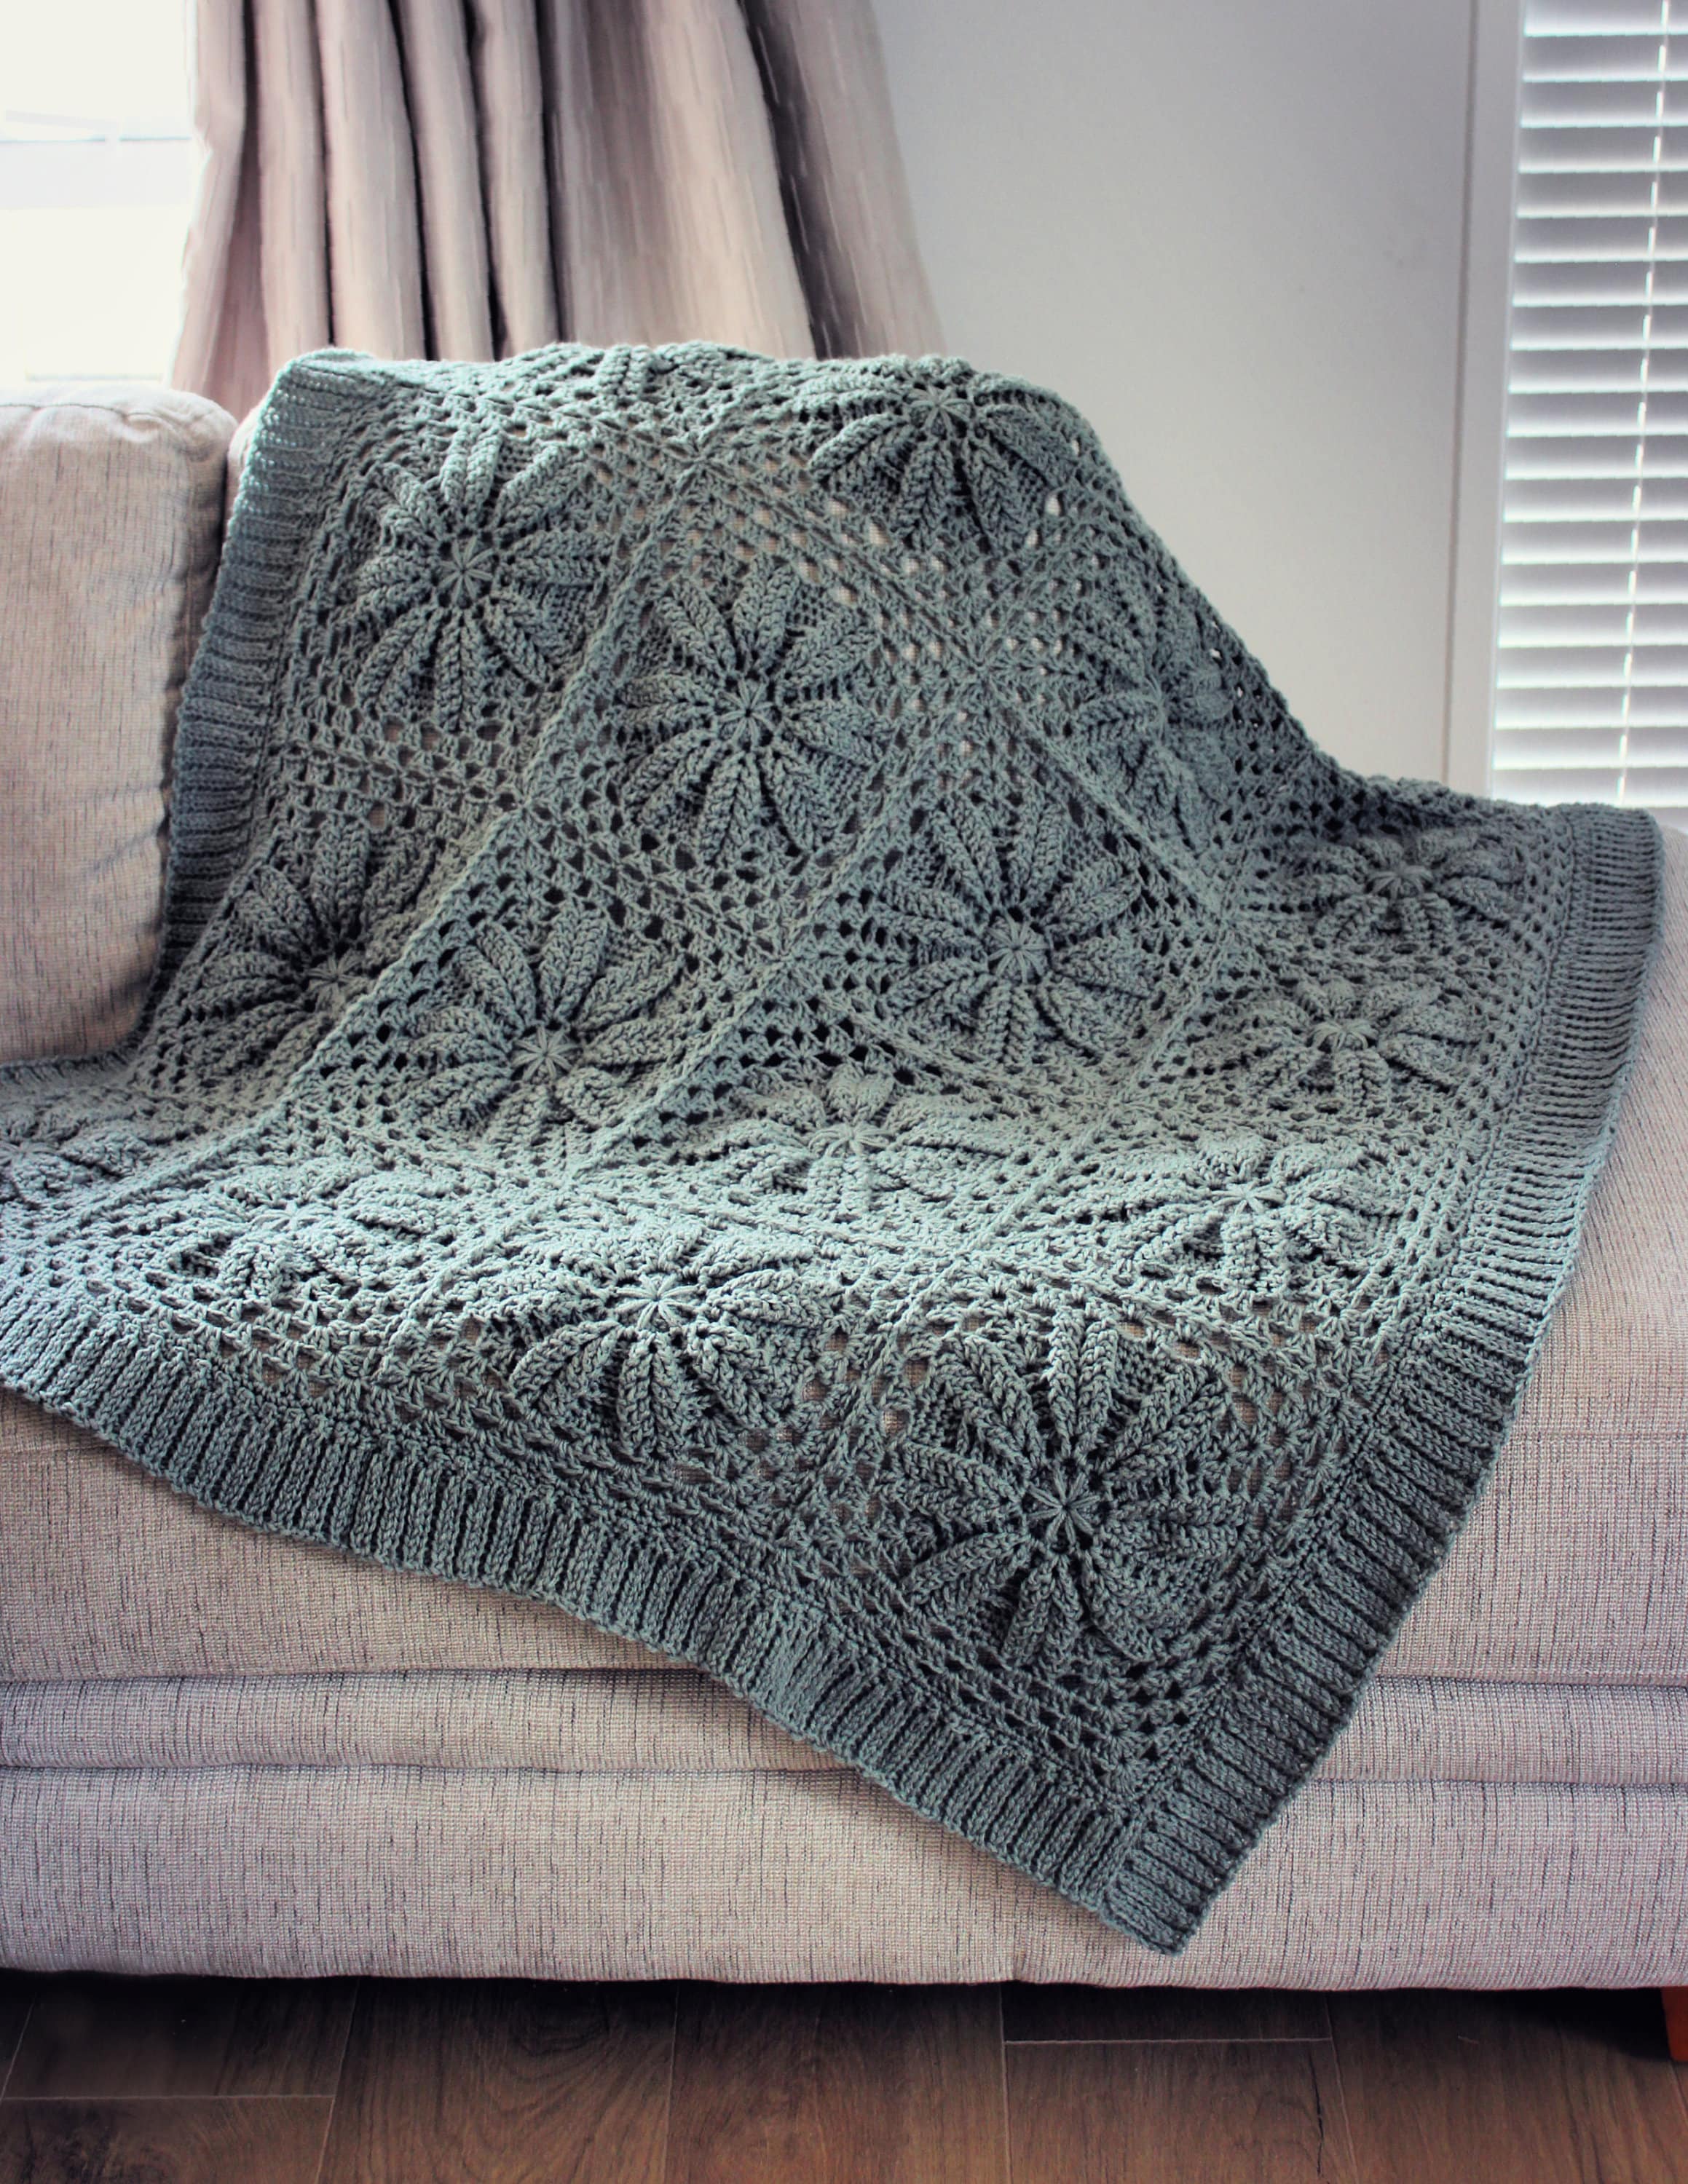 CROCHET PATTERN Thyme to Crochet Afghan Make to Any Size PDF Download 